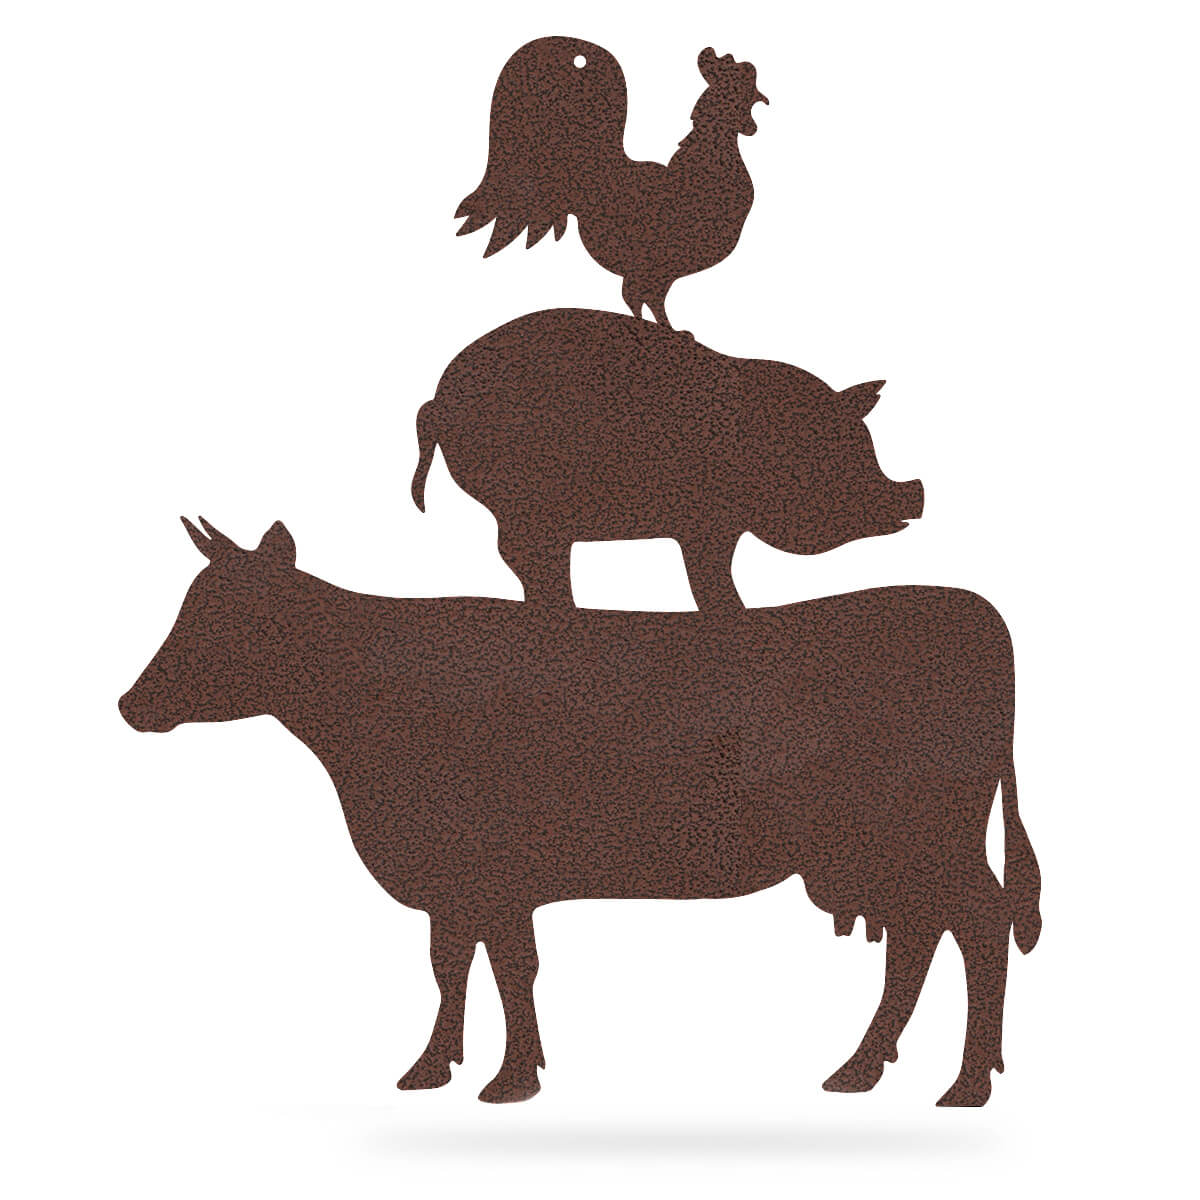 Farmyard Friends Wall Art 12"x14" Cow - Pig - Rooster / Penny Vein - RealSteel Center